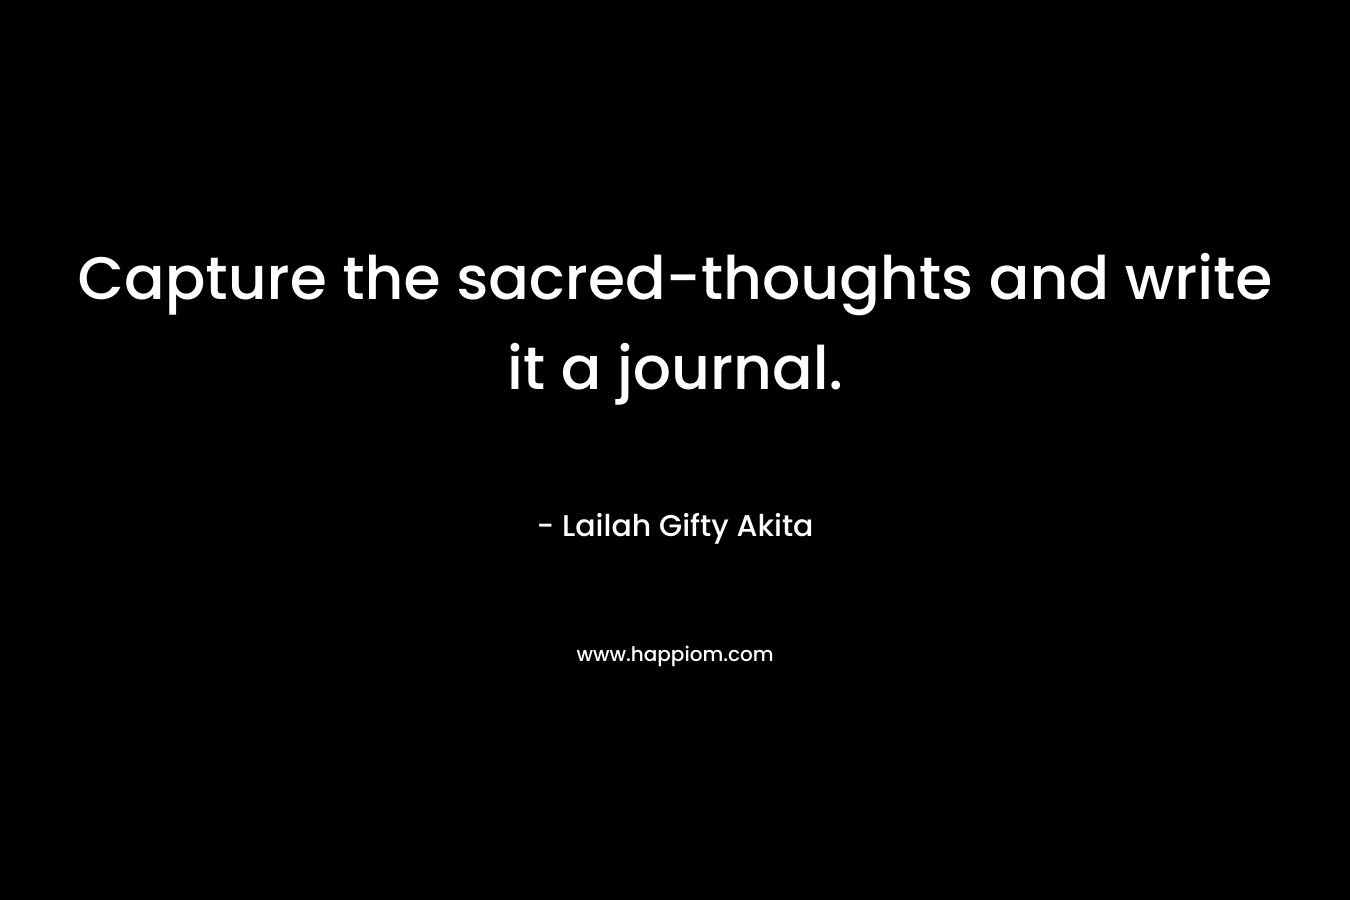 Capture the sacred-thoughts and write it a journal.